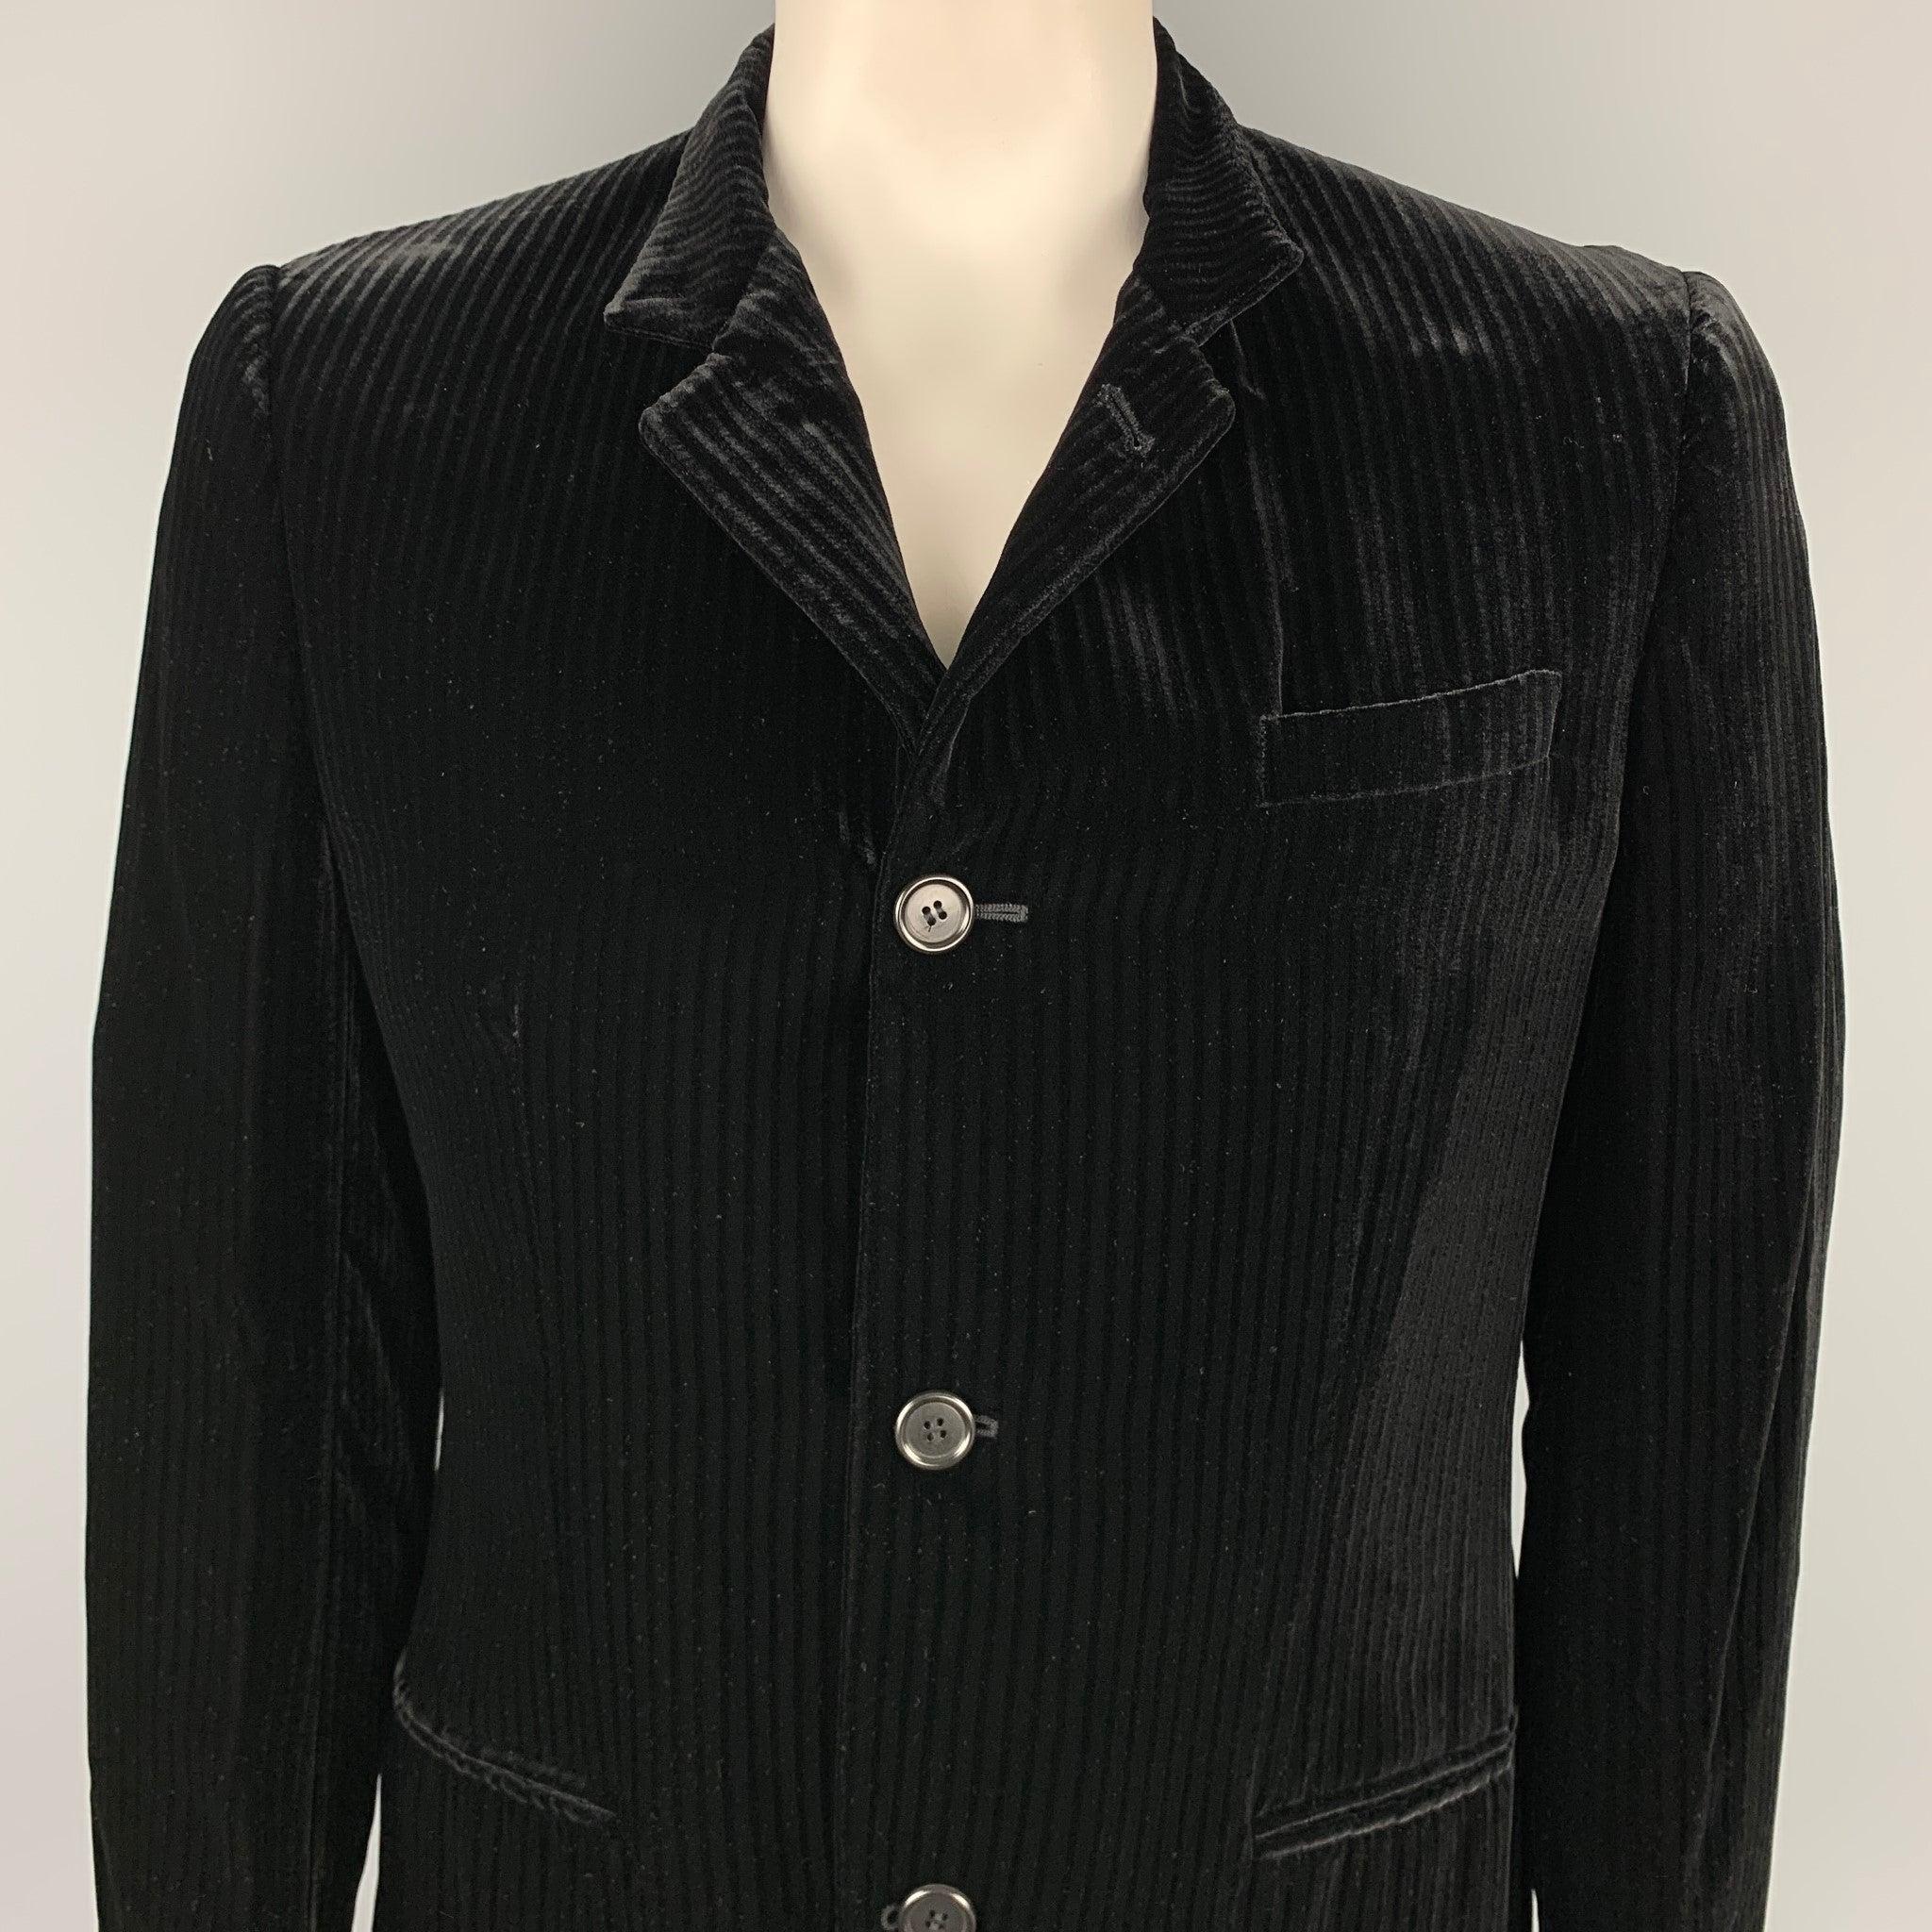 GIORGIO ARMANI jacket comes in a black stripe rayon velvet featuring a spread collar, slit pockets, and a buttoned closure. Made in Italy.Very Good
Pre-Owned Condition. 

Marked:   IT 54
 

Measurements: 
 
Shoulder: 18.5 inches Chest: 44 inches